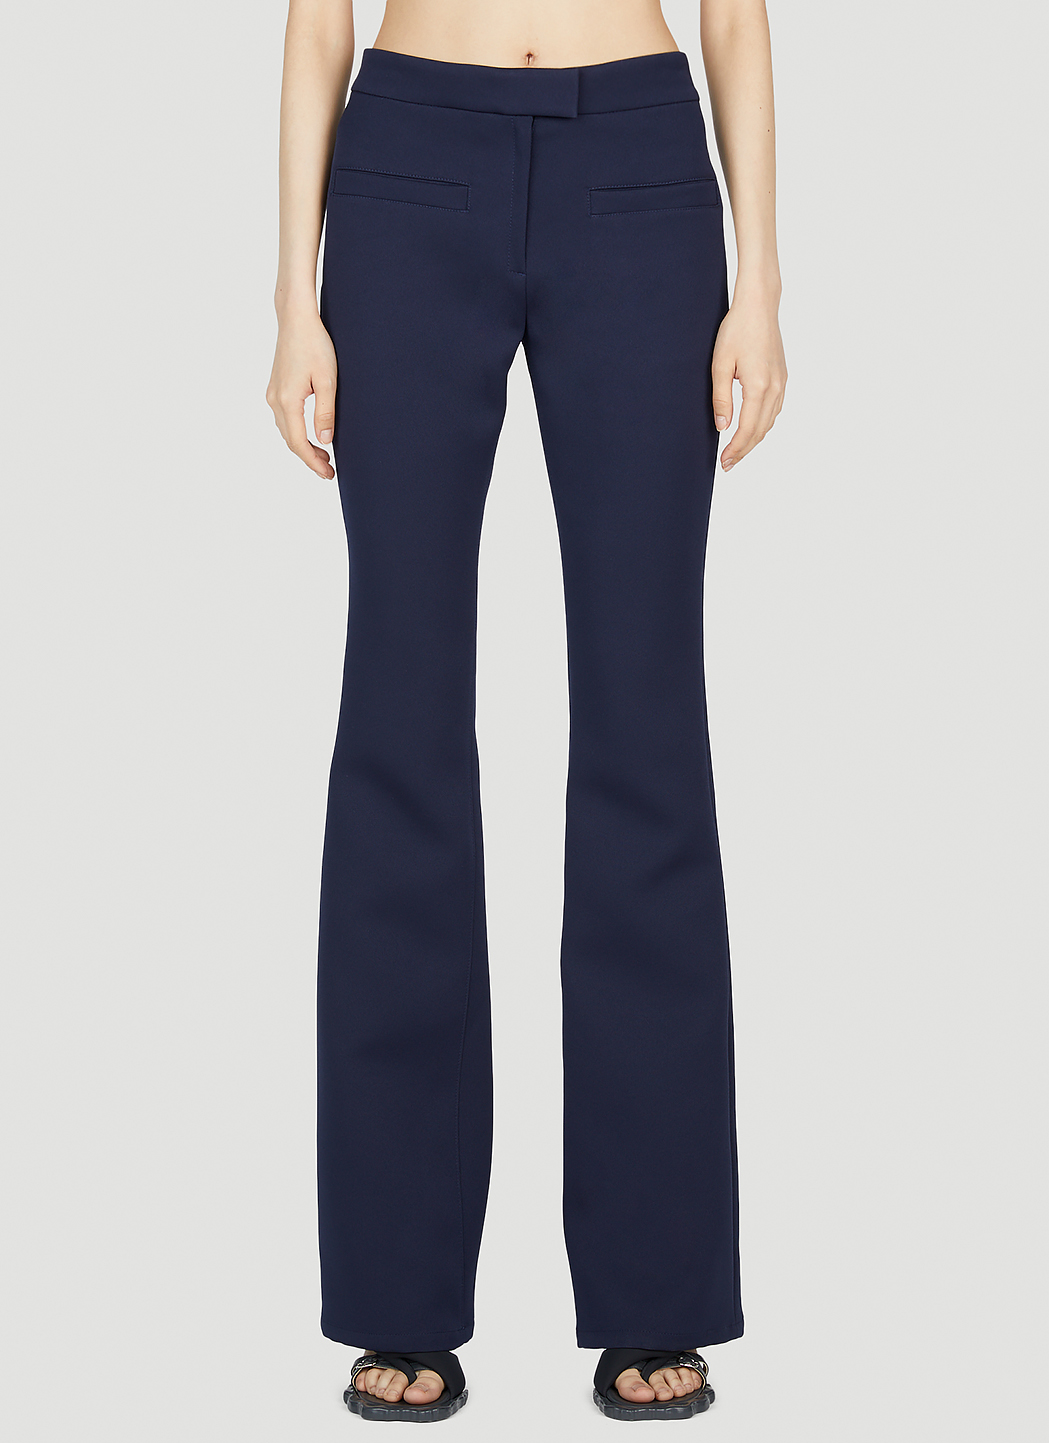 Courrèges Heritage Twill Pants